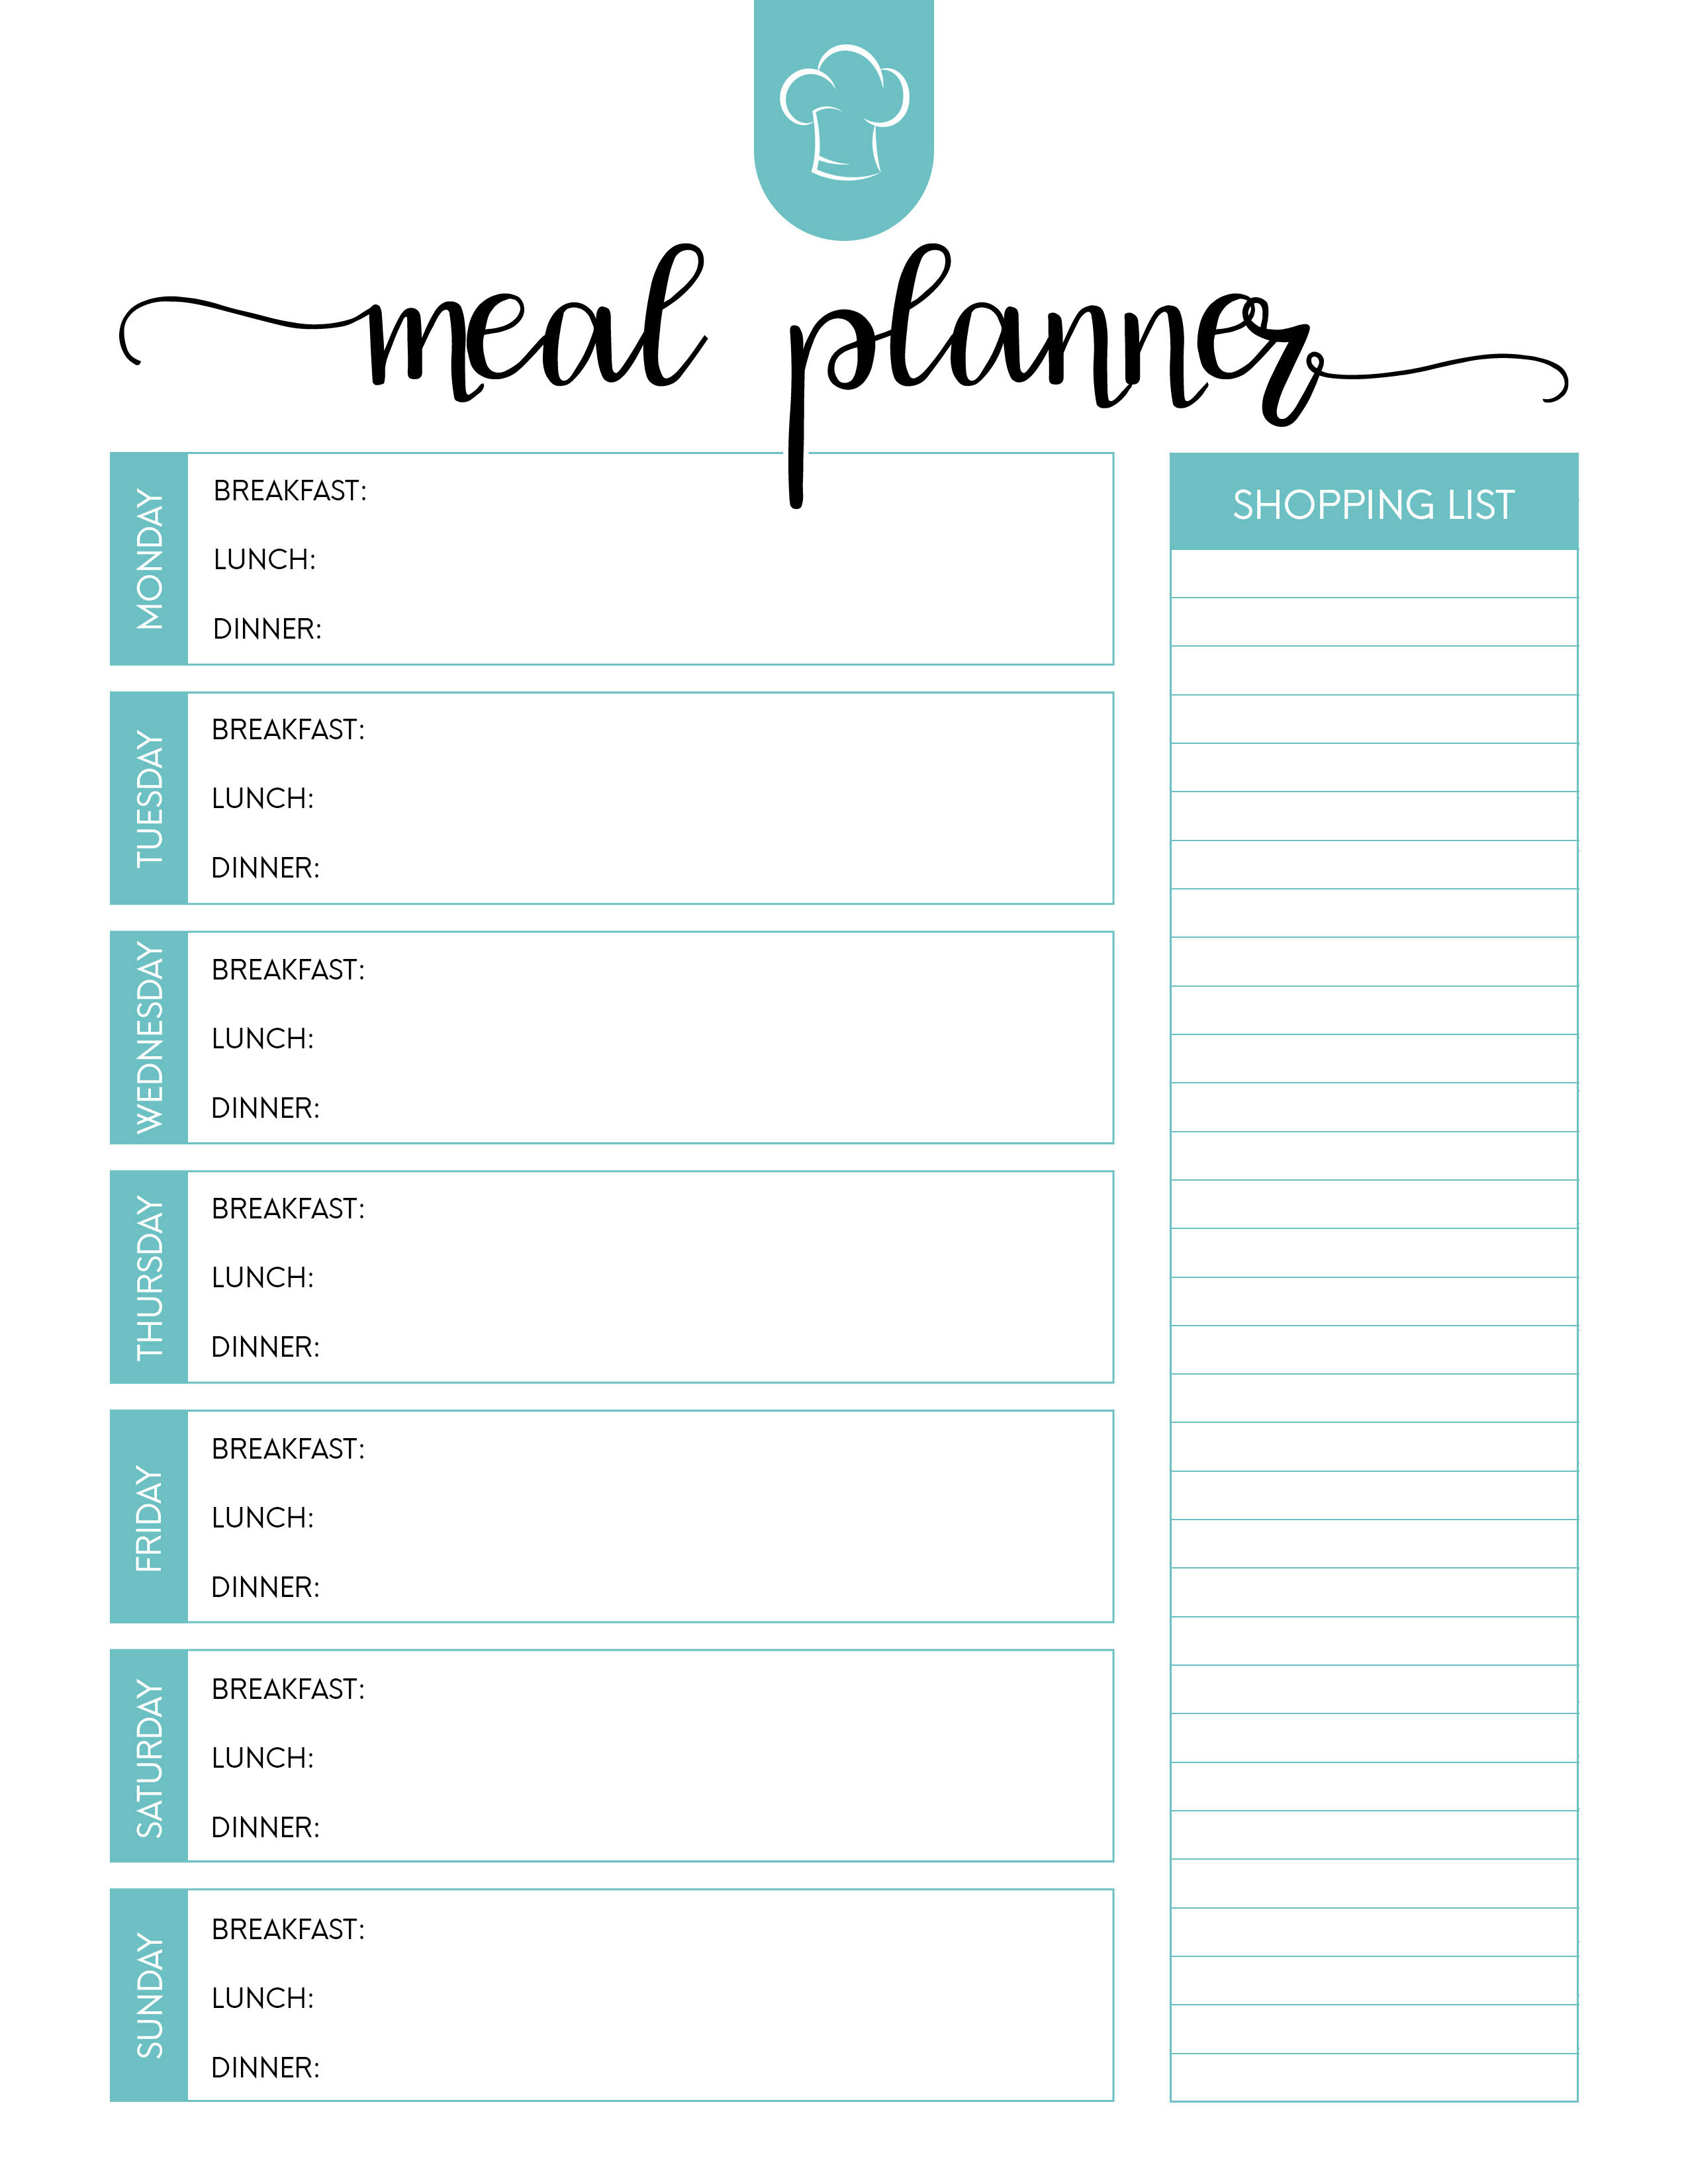 Meal Planning Template Free from uroomsurf.com